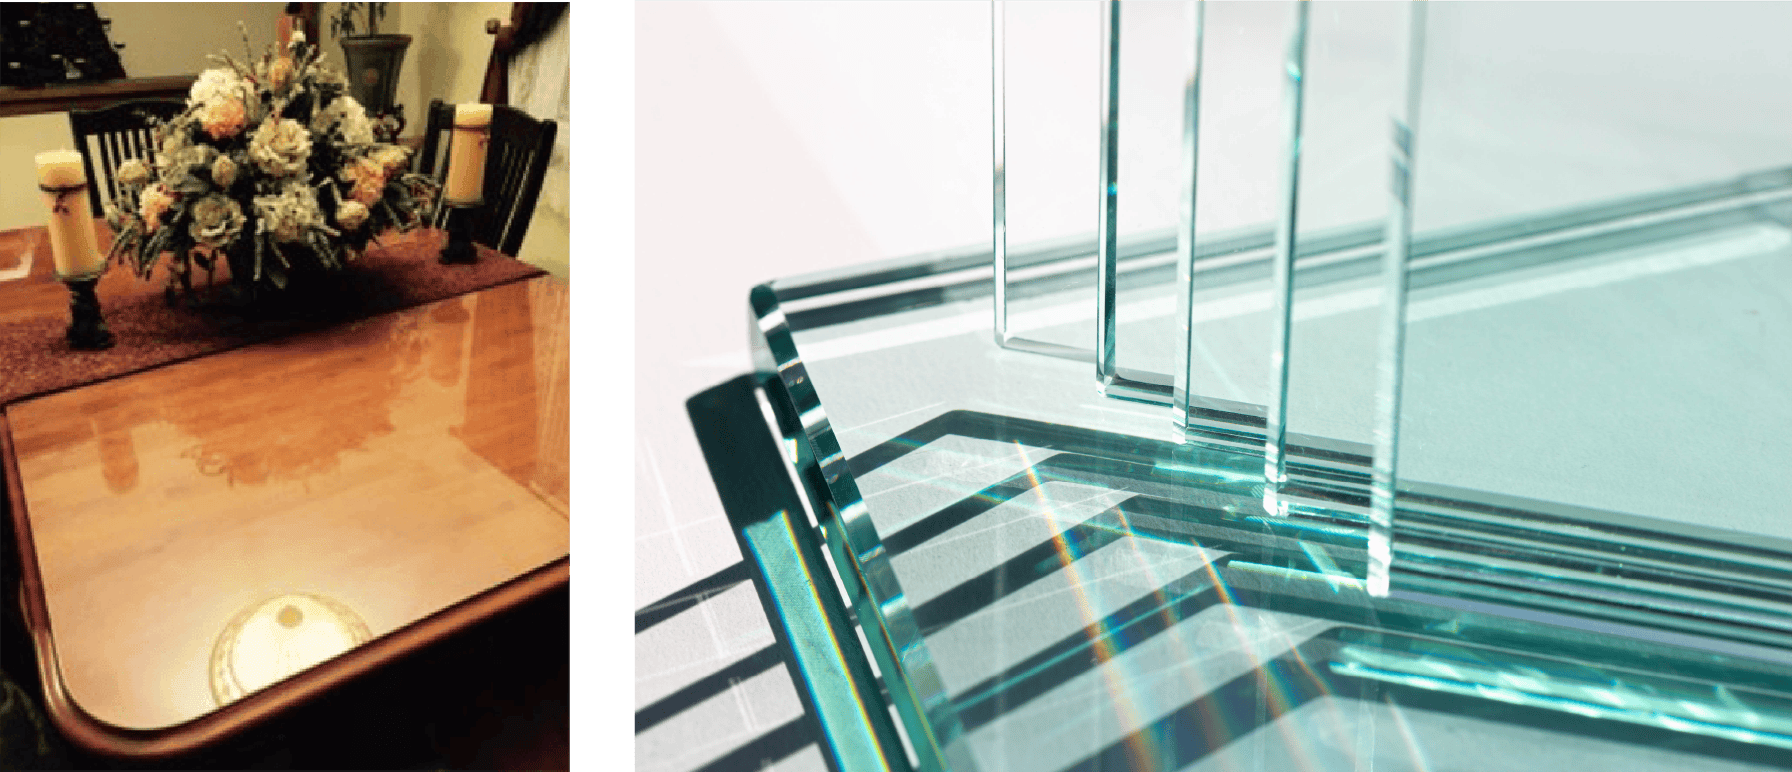 two images, 1st being Glass tabletop laid on top of wooden table with vase of flowers resting on them. 2nd image is of clear glass samples catching light